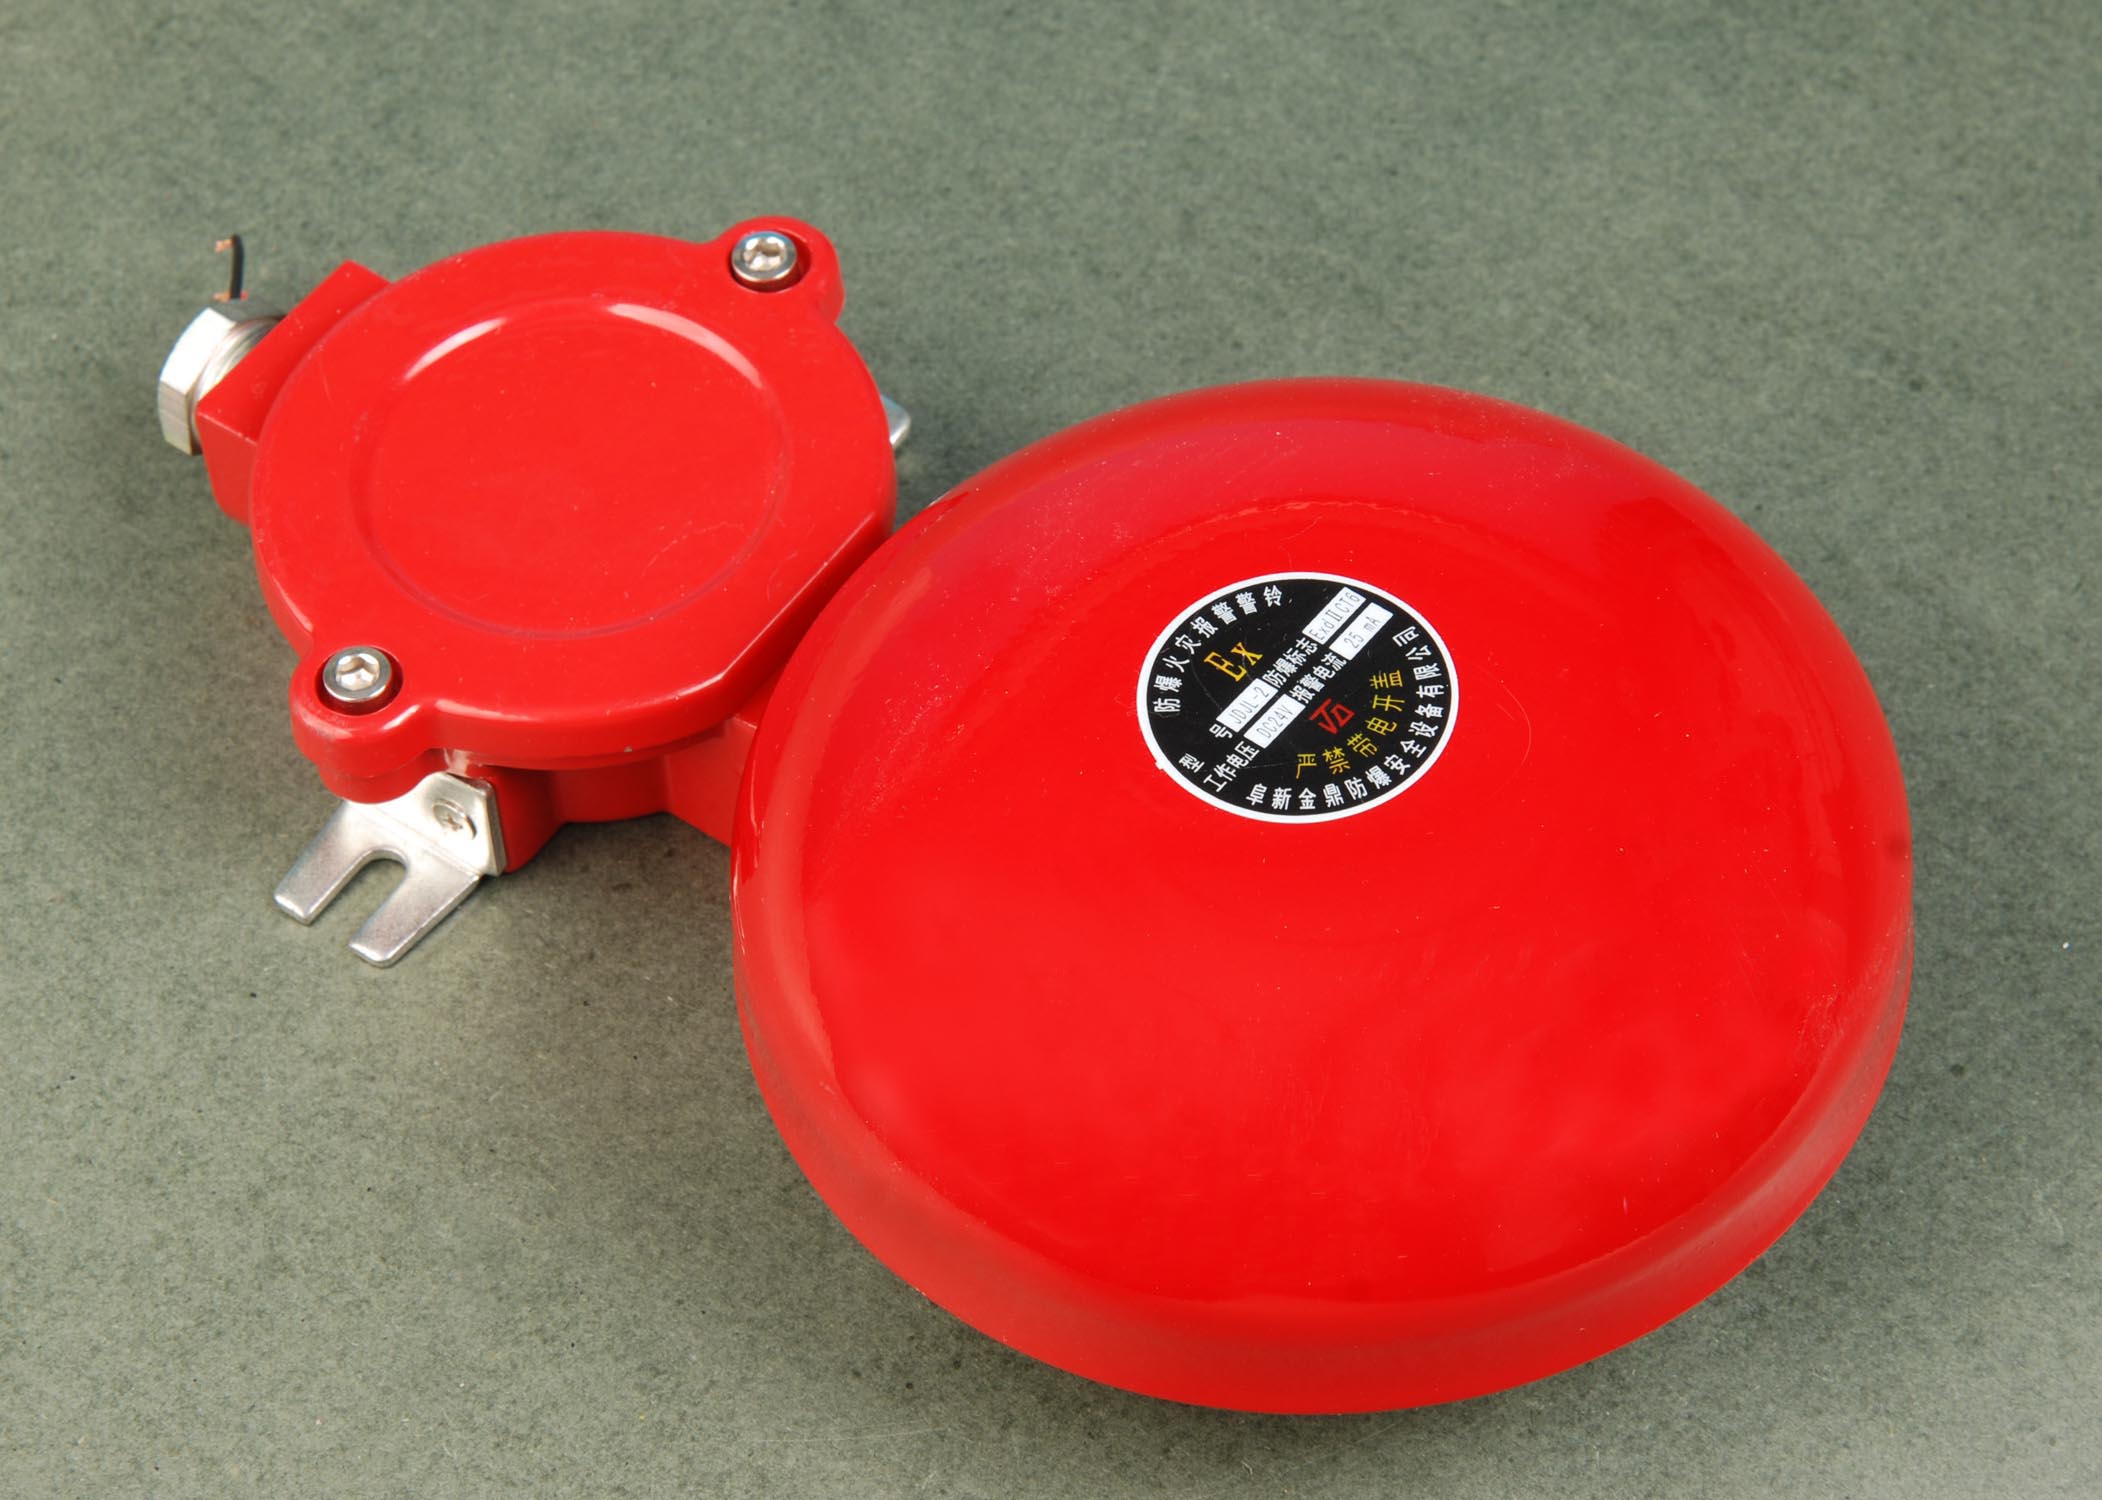 alarm accessory/explosion proof fire bell.jpg